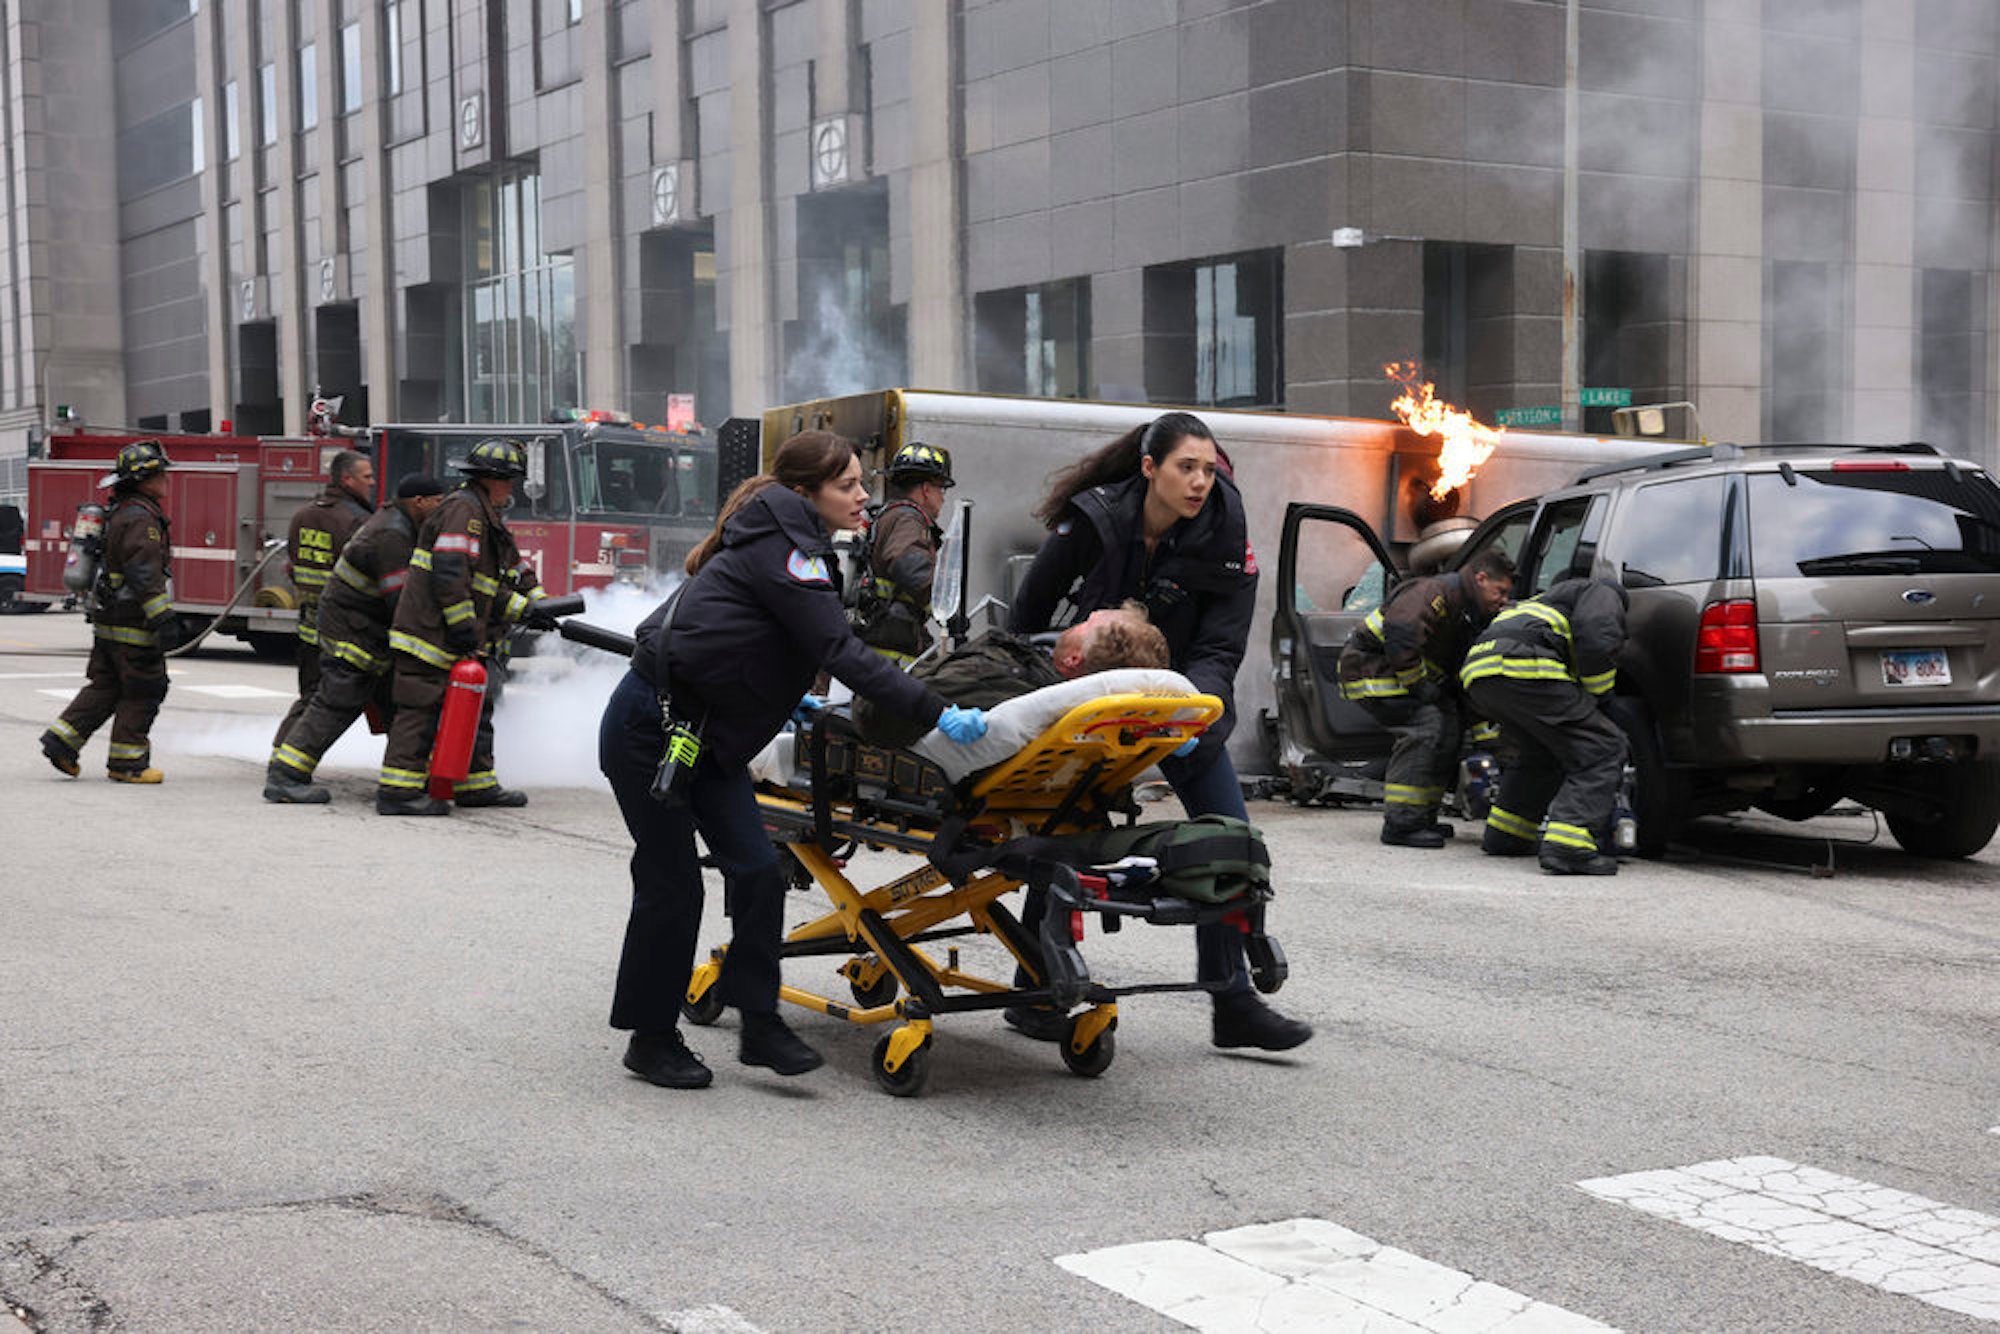 Emma Jacobs and Violet Mikami wheeling away someone in a stretcher on the street in 'Chicago Fire' Season 10 Episode 21